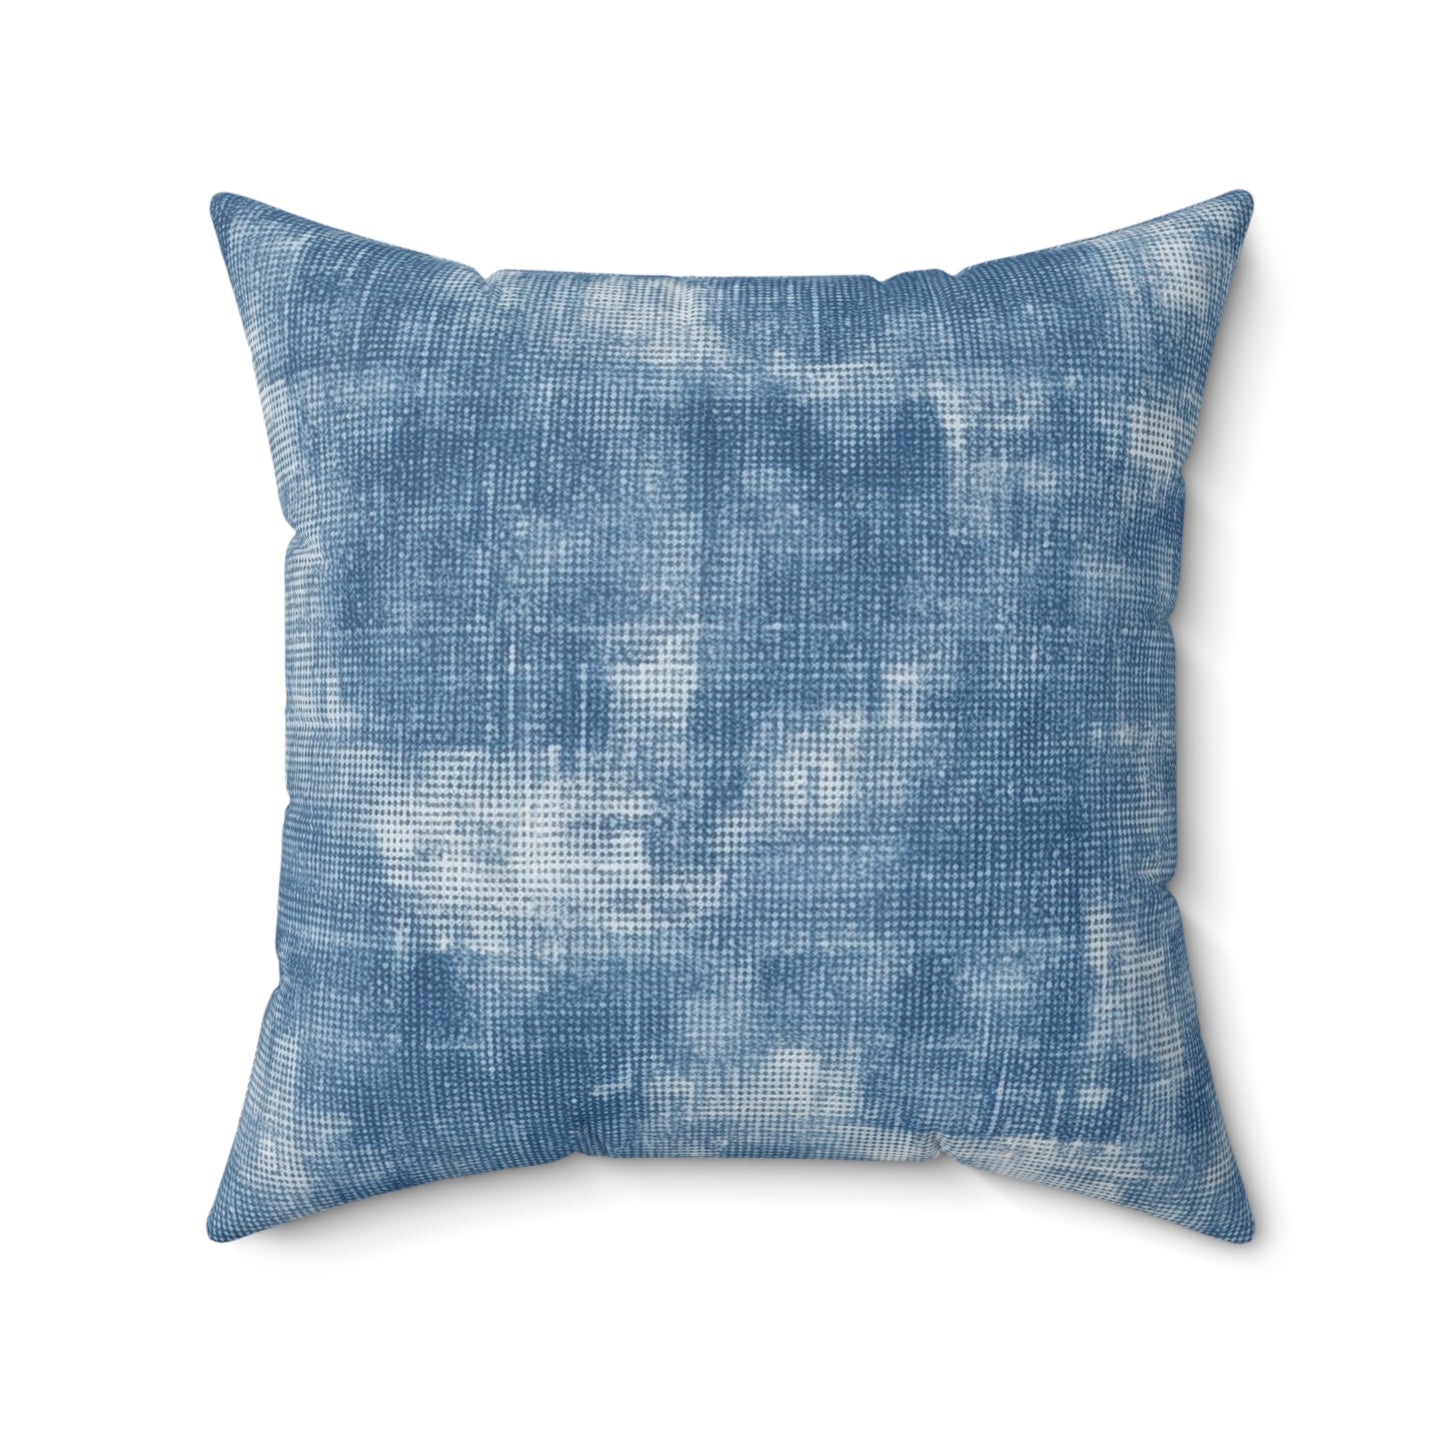 Faded Blue Washed-Out: Denim-Inspired, Style Fabric - Spun Polyester Square Pillow